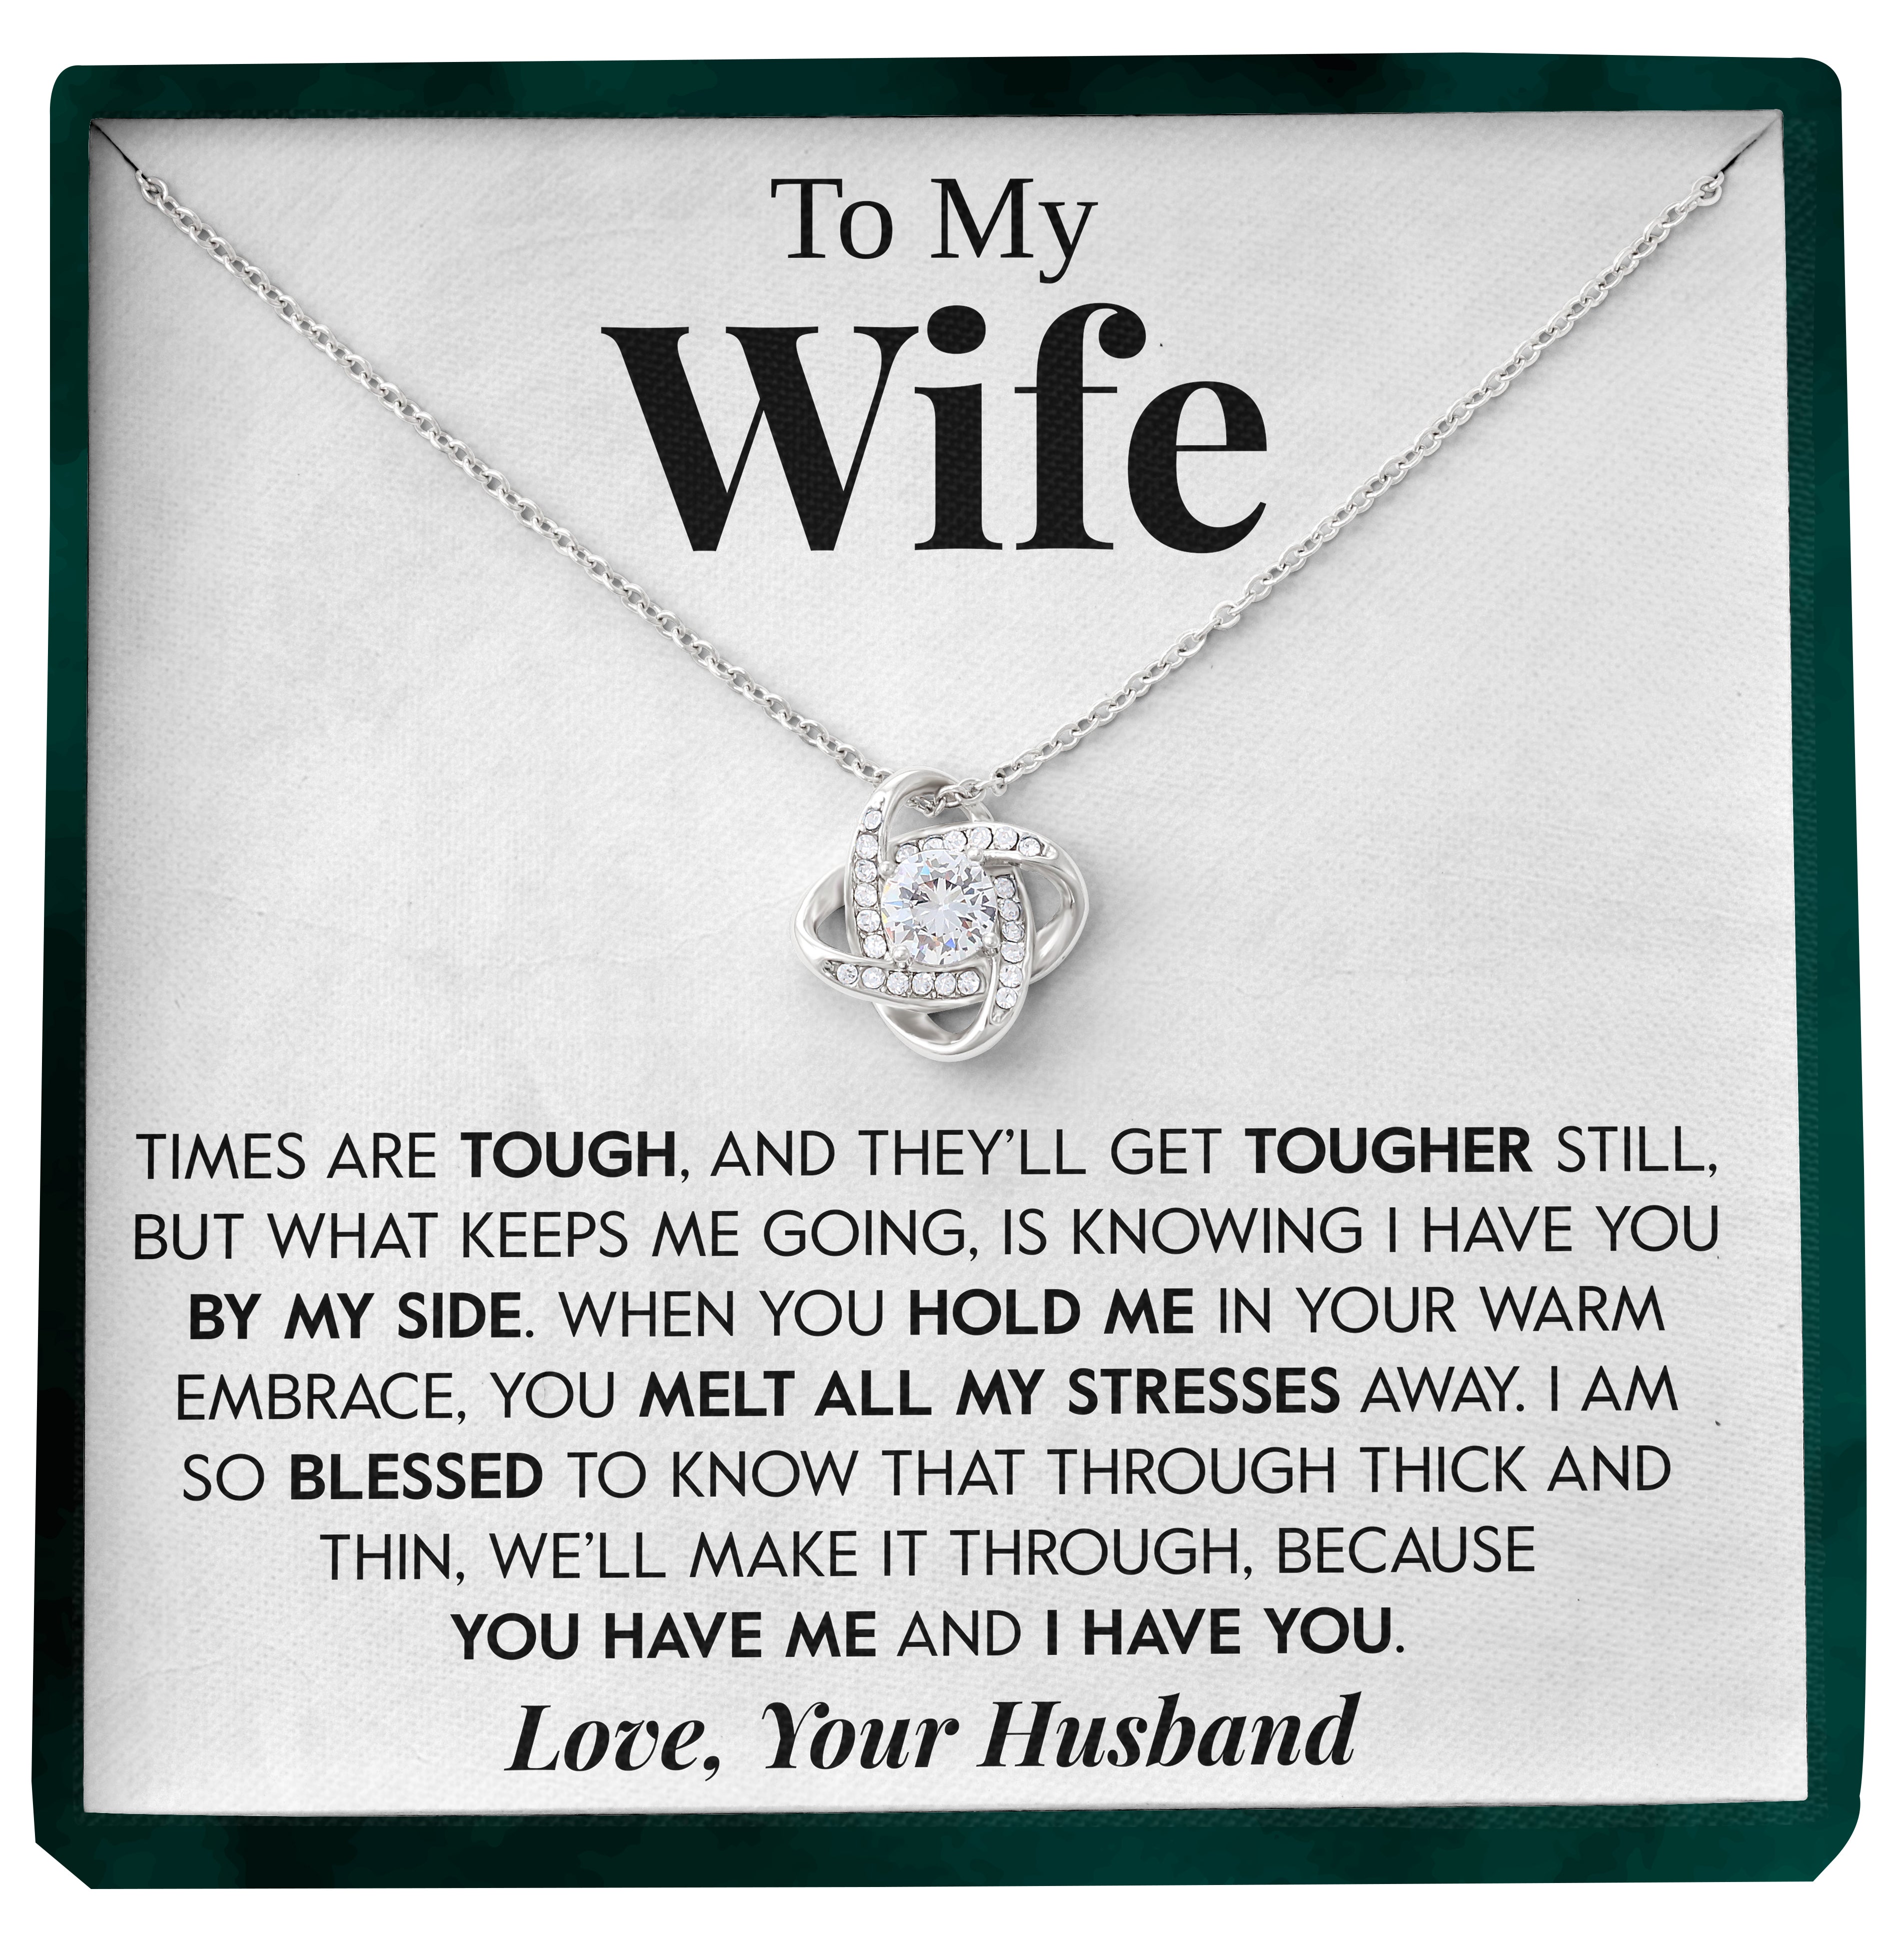 To My Wife | "Through Thick and Thin" | Love Knot Necklace